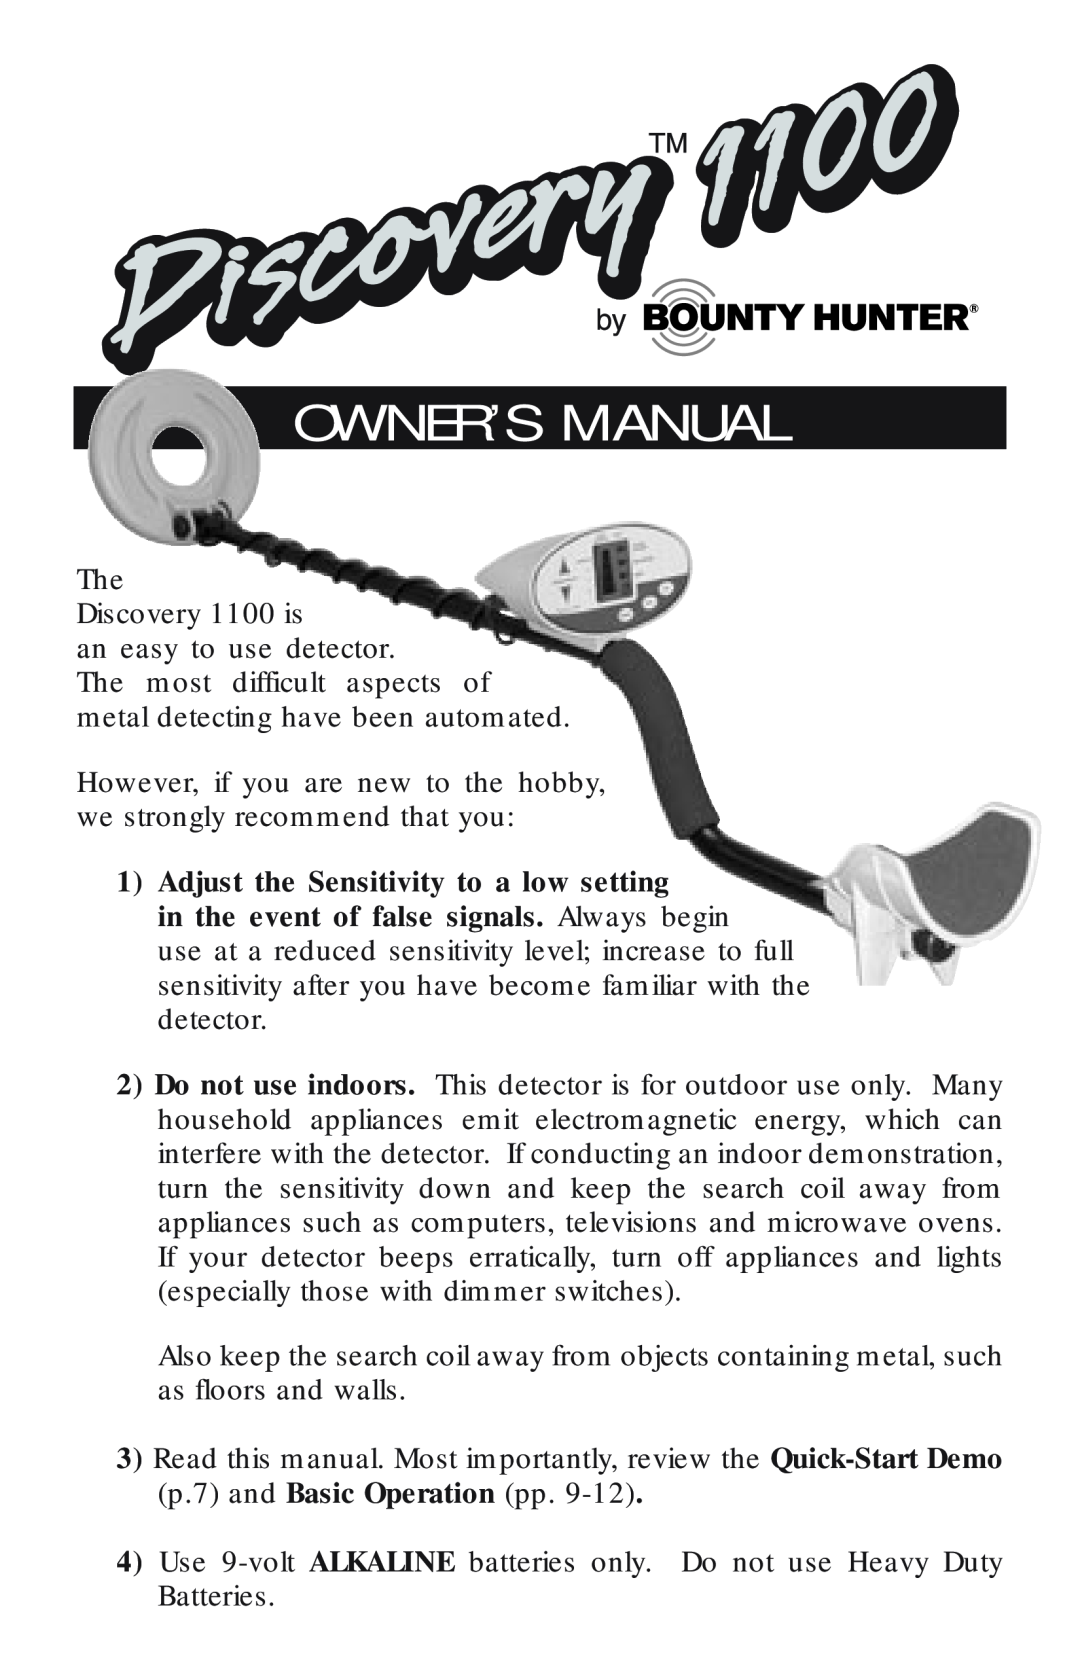 Bounty Hunter 1100 owner manual Owner’S Manual, Accessories, Adjust the Sensitivity to a low setting 